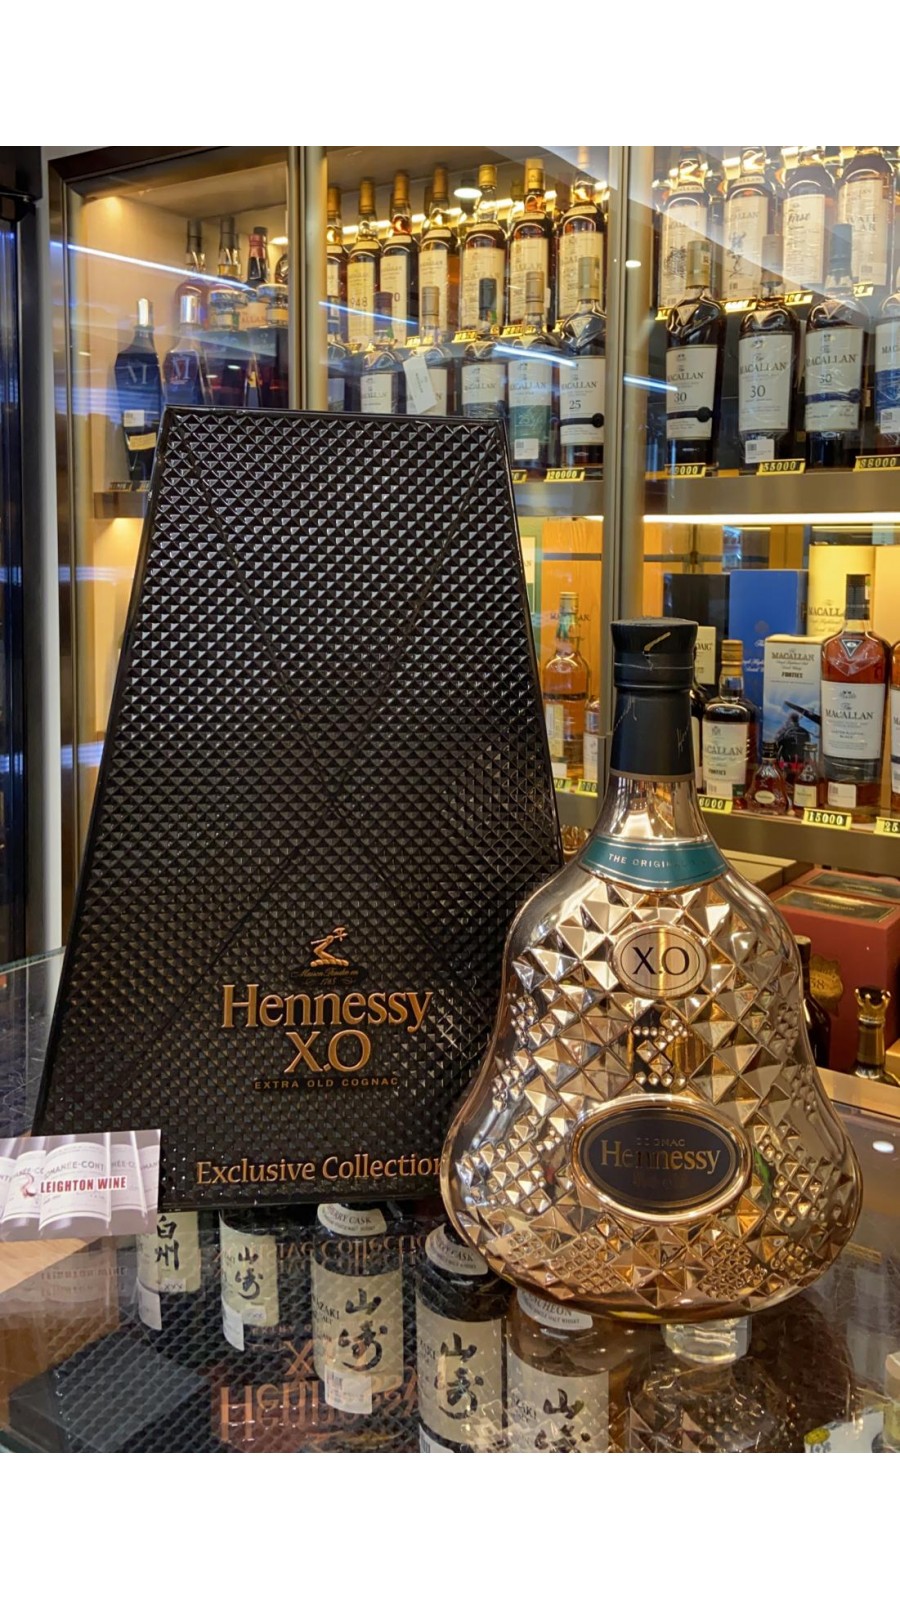 Hennessy XO Exclusive Collection Selection 7(vll) 2014 Tom Dixonn 3L